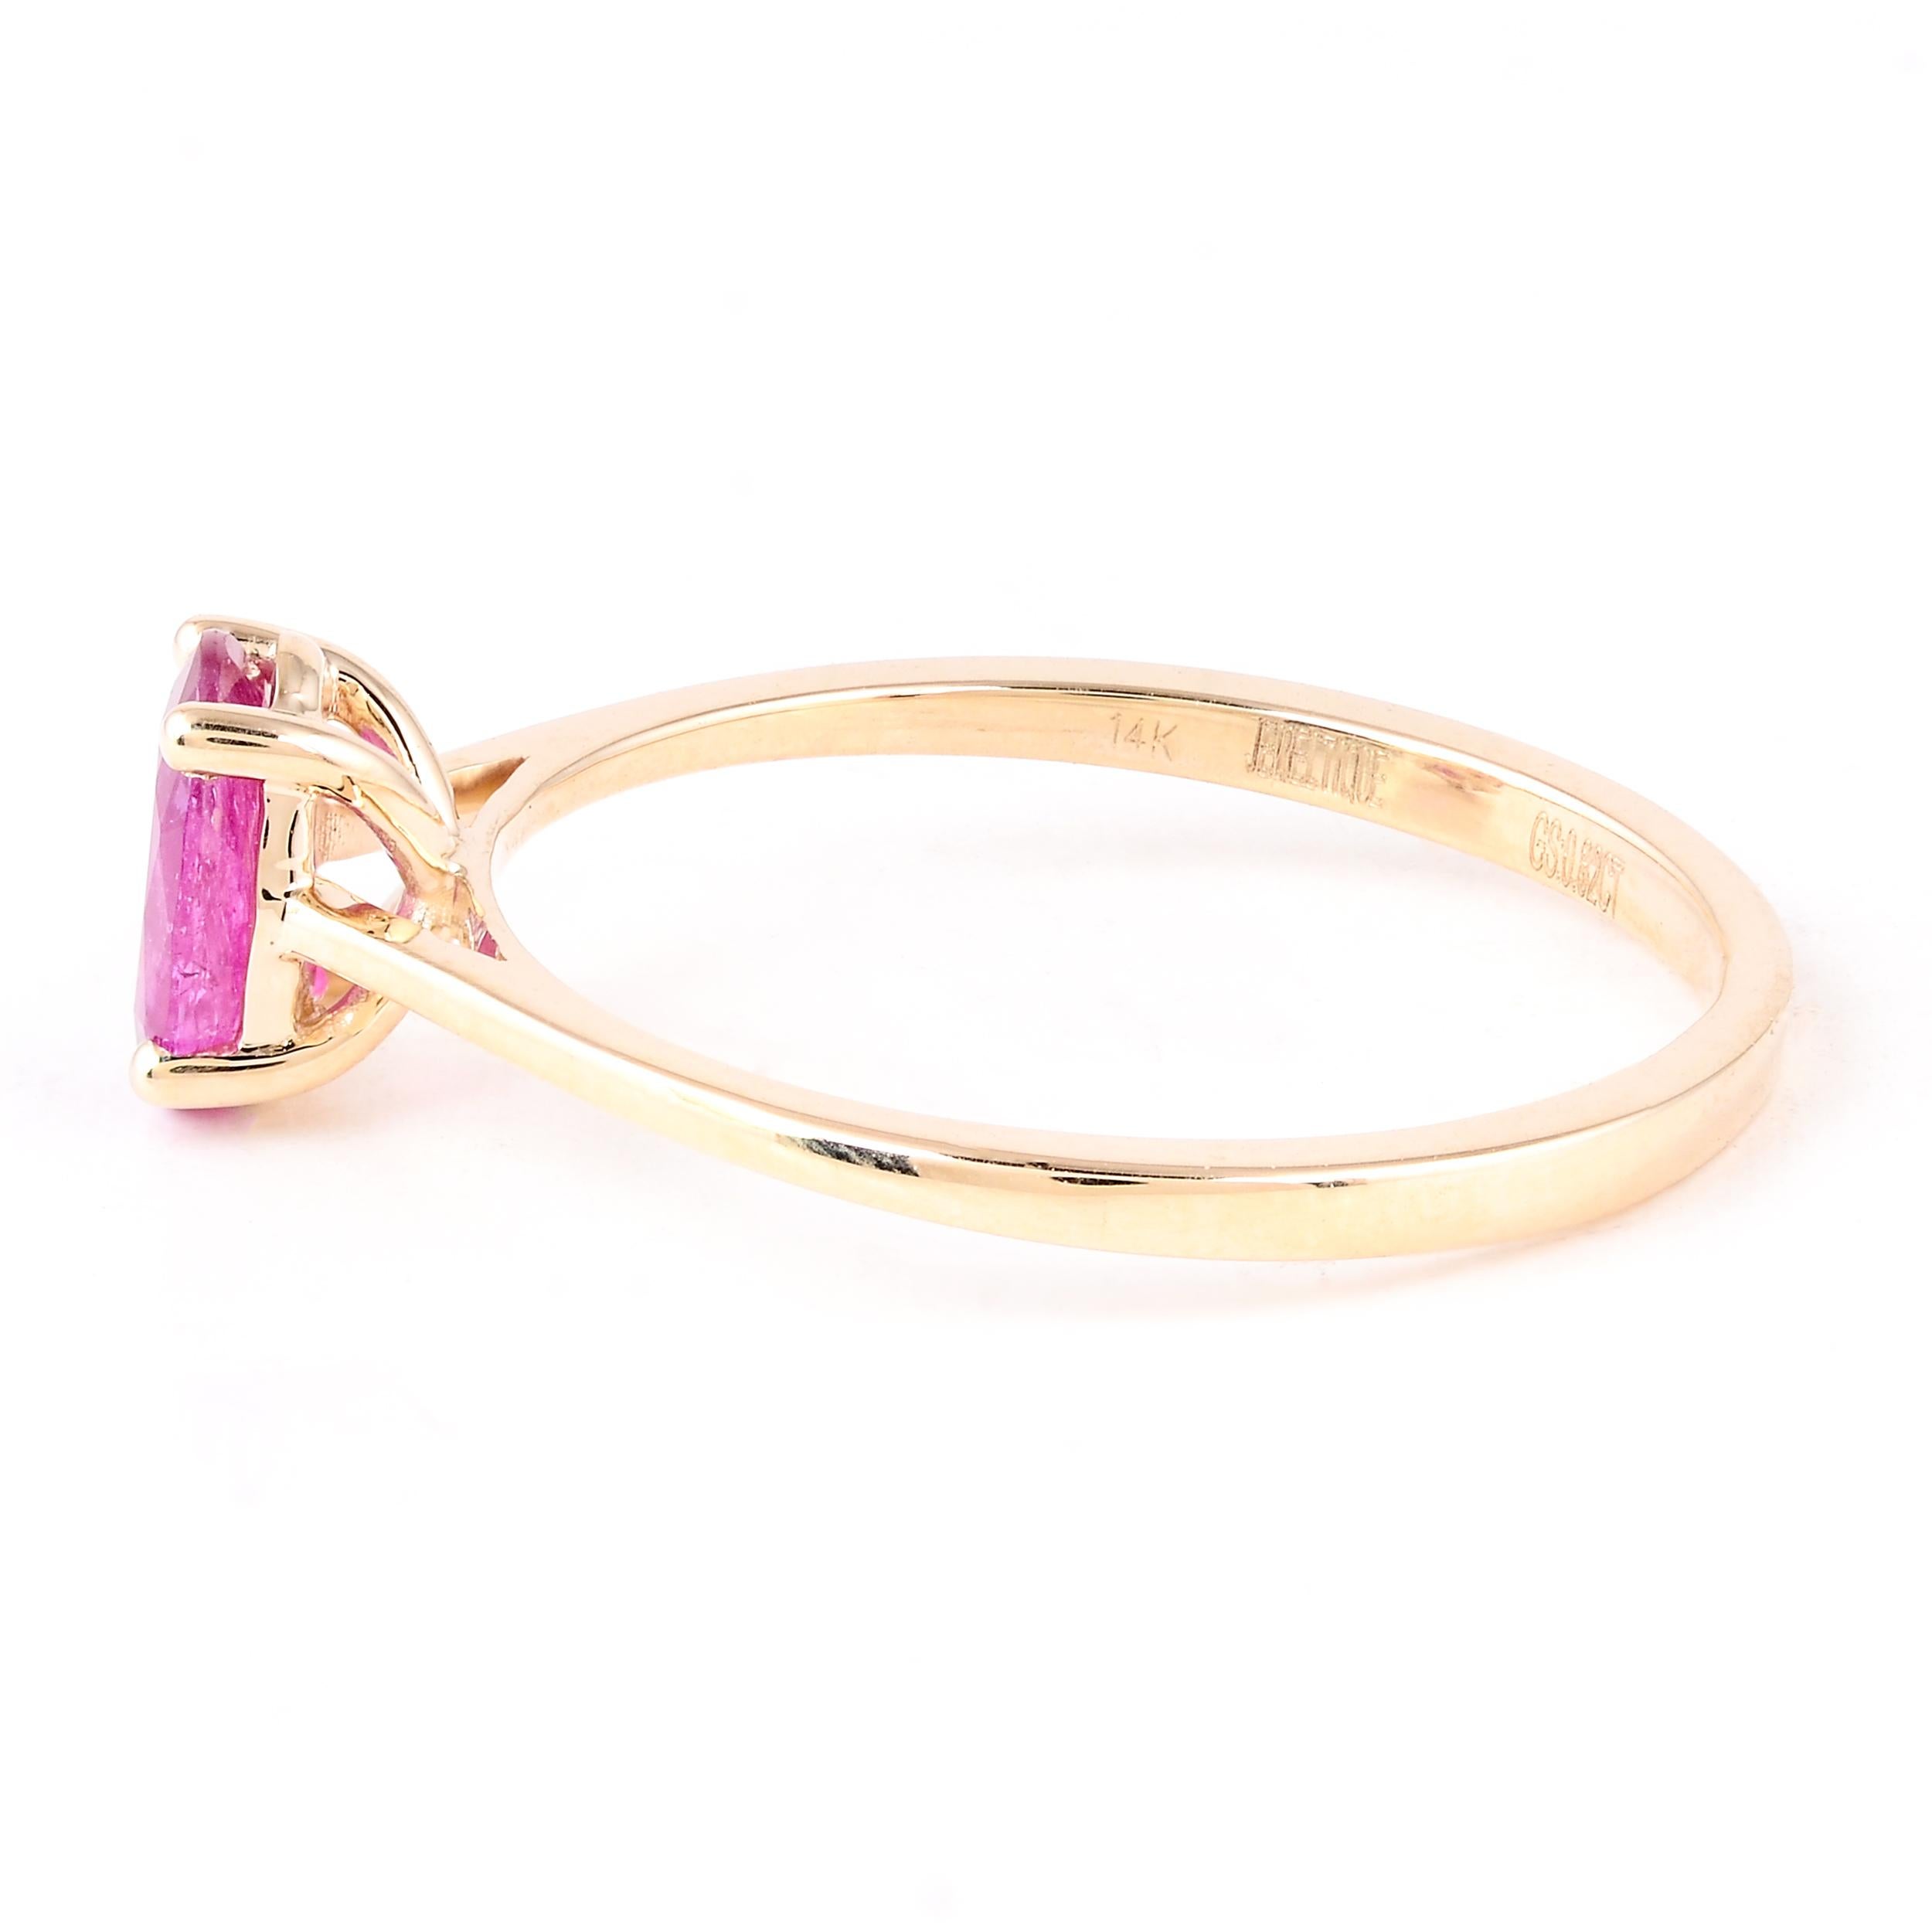 Elegant 14K Ruby Cocktail Ring, Size 6.75 - Luxury Statement Jewelry Piece For Sale 1